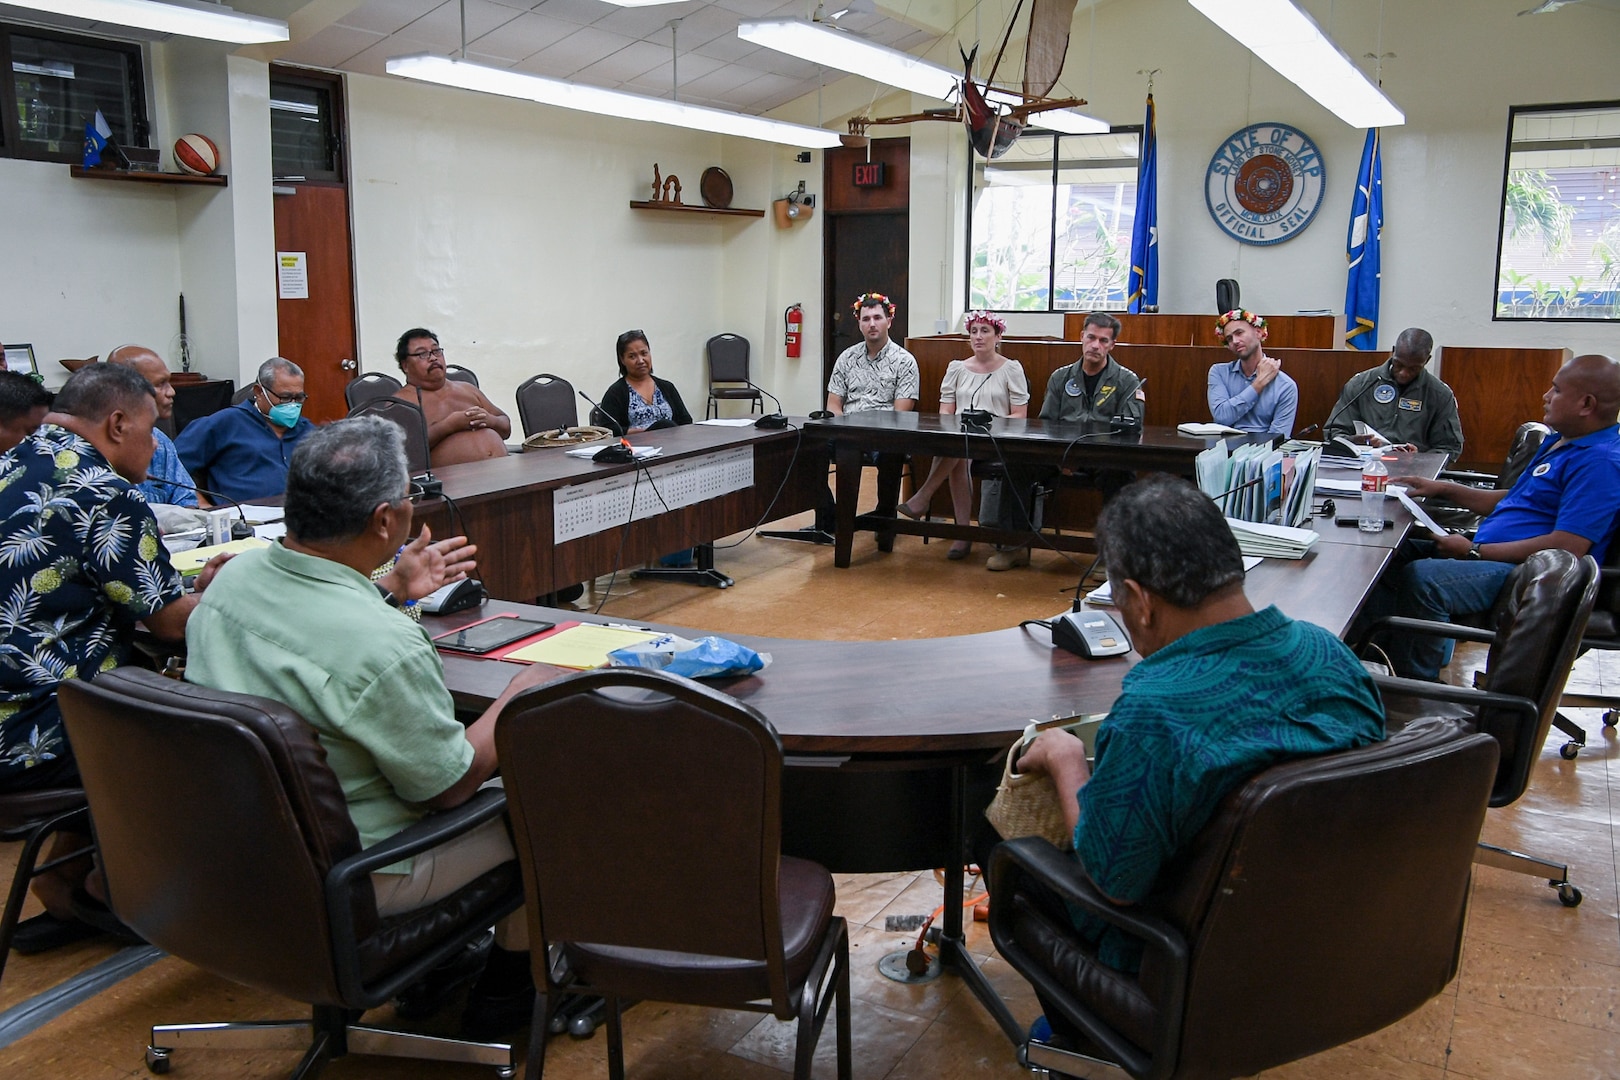 COLONIA, Yap, Federated States of Micronesia  (March 17, 2023) Adm. John C. Aquilino, Commander U.S. Indo-Pacific Command, meets with senior government leaders in the Yap State Legislature during an overseas trip to the Federated States of Micronesia. USINDOPACOM is committed to enhancing stability in the Asia-Pacific region by promoting security cooperation, encouraging peaceful development, responding to contingencies, deterring aggression and, when necessary, fighting to win. (U.S. Navy photo by Chief Mass Communication Specialist Shannon M. Smith)